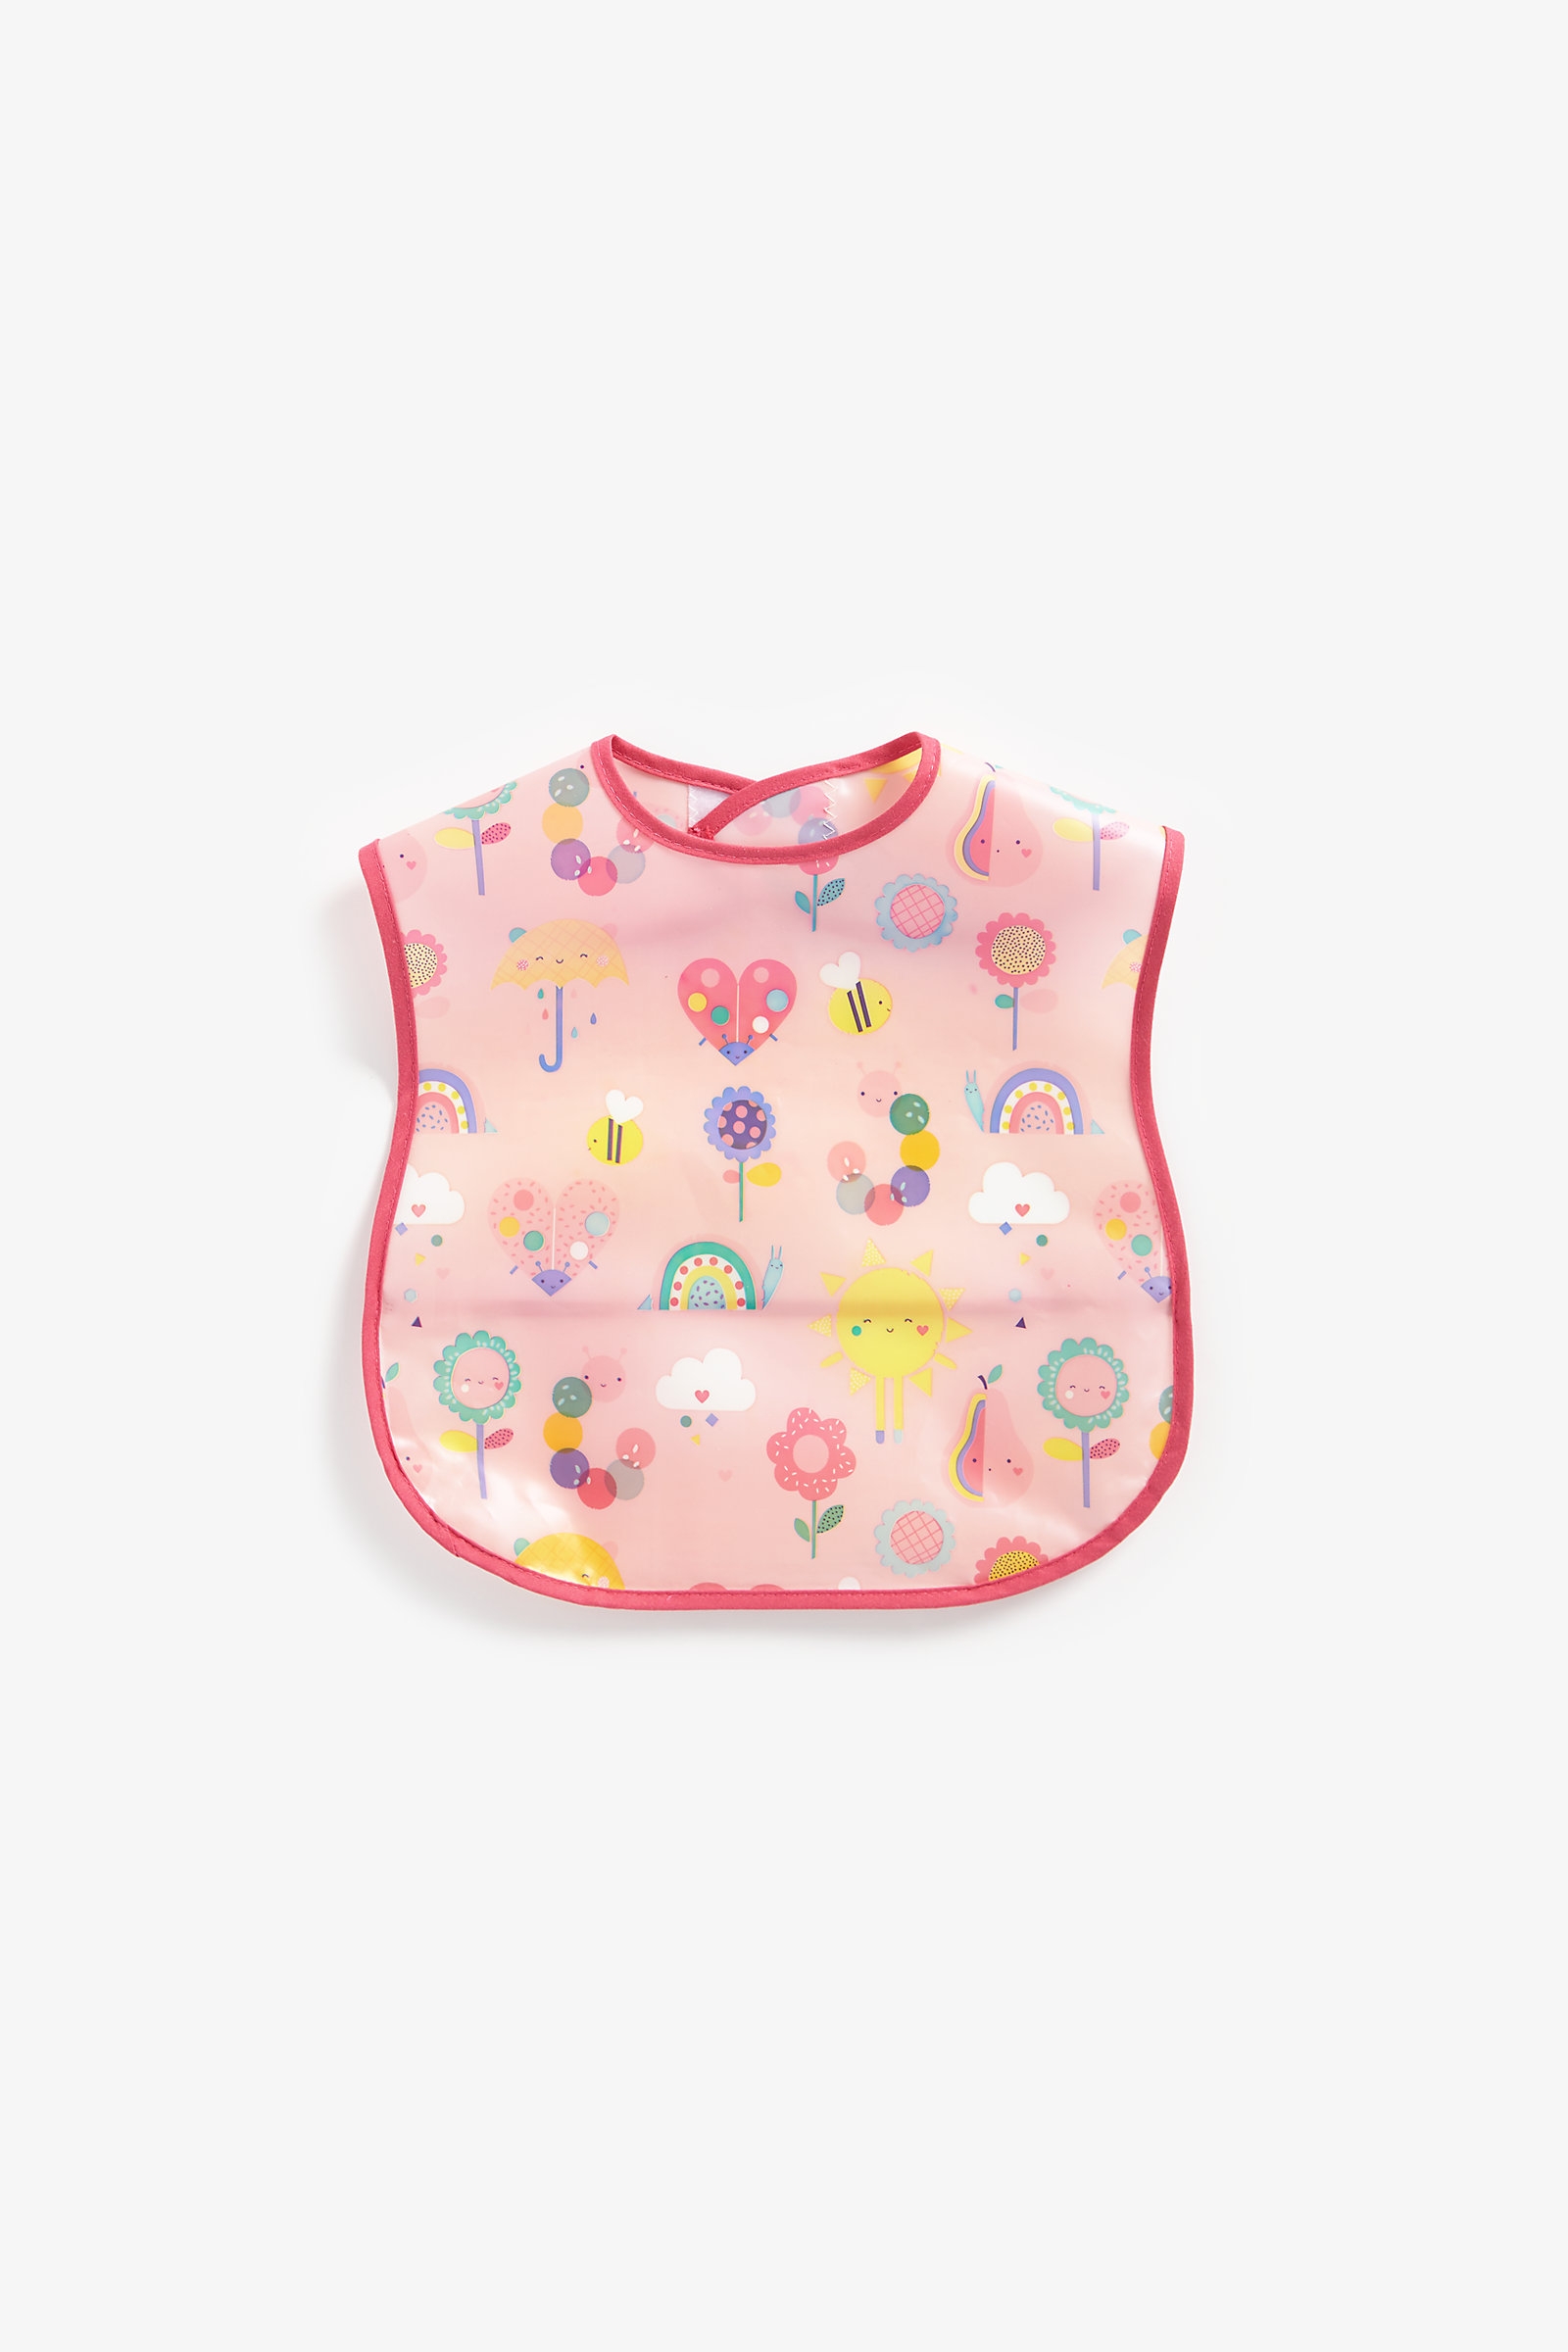 Mothercare | Mothercare Sunshine Crumb-Catcher Bibs Yellow Pack of 2 3